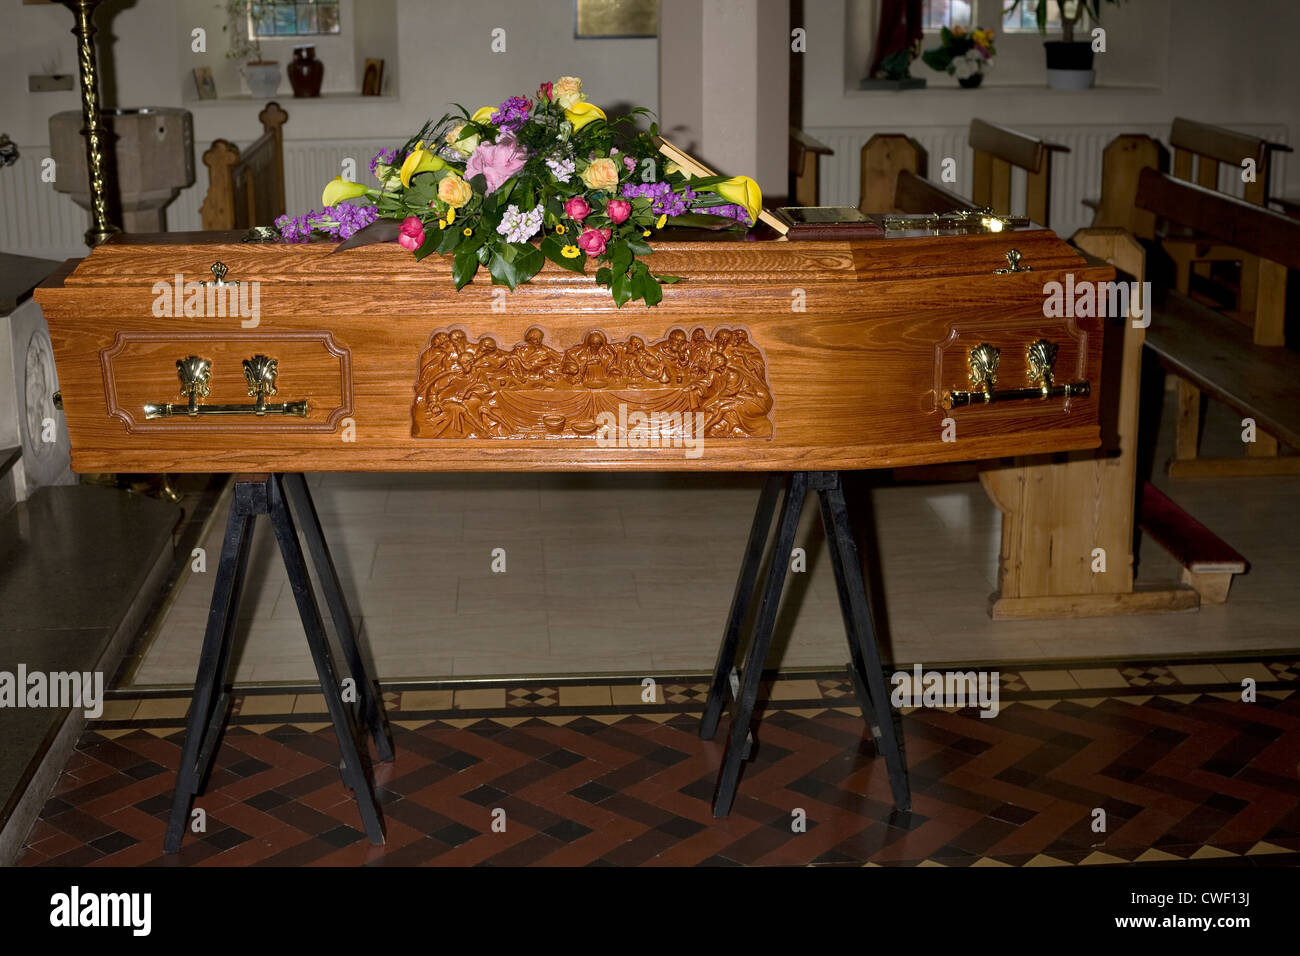 A wooden coffin with last supper design and flowers on top resting in church ready for the occupant's funeral the following day Stock Photo